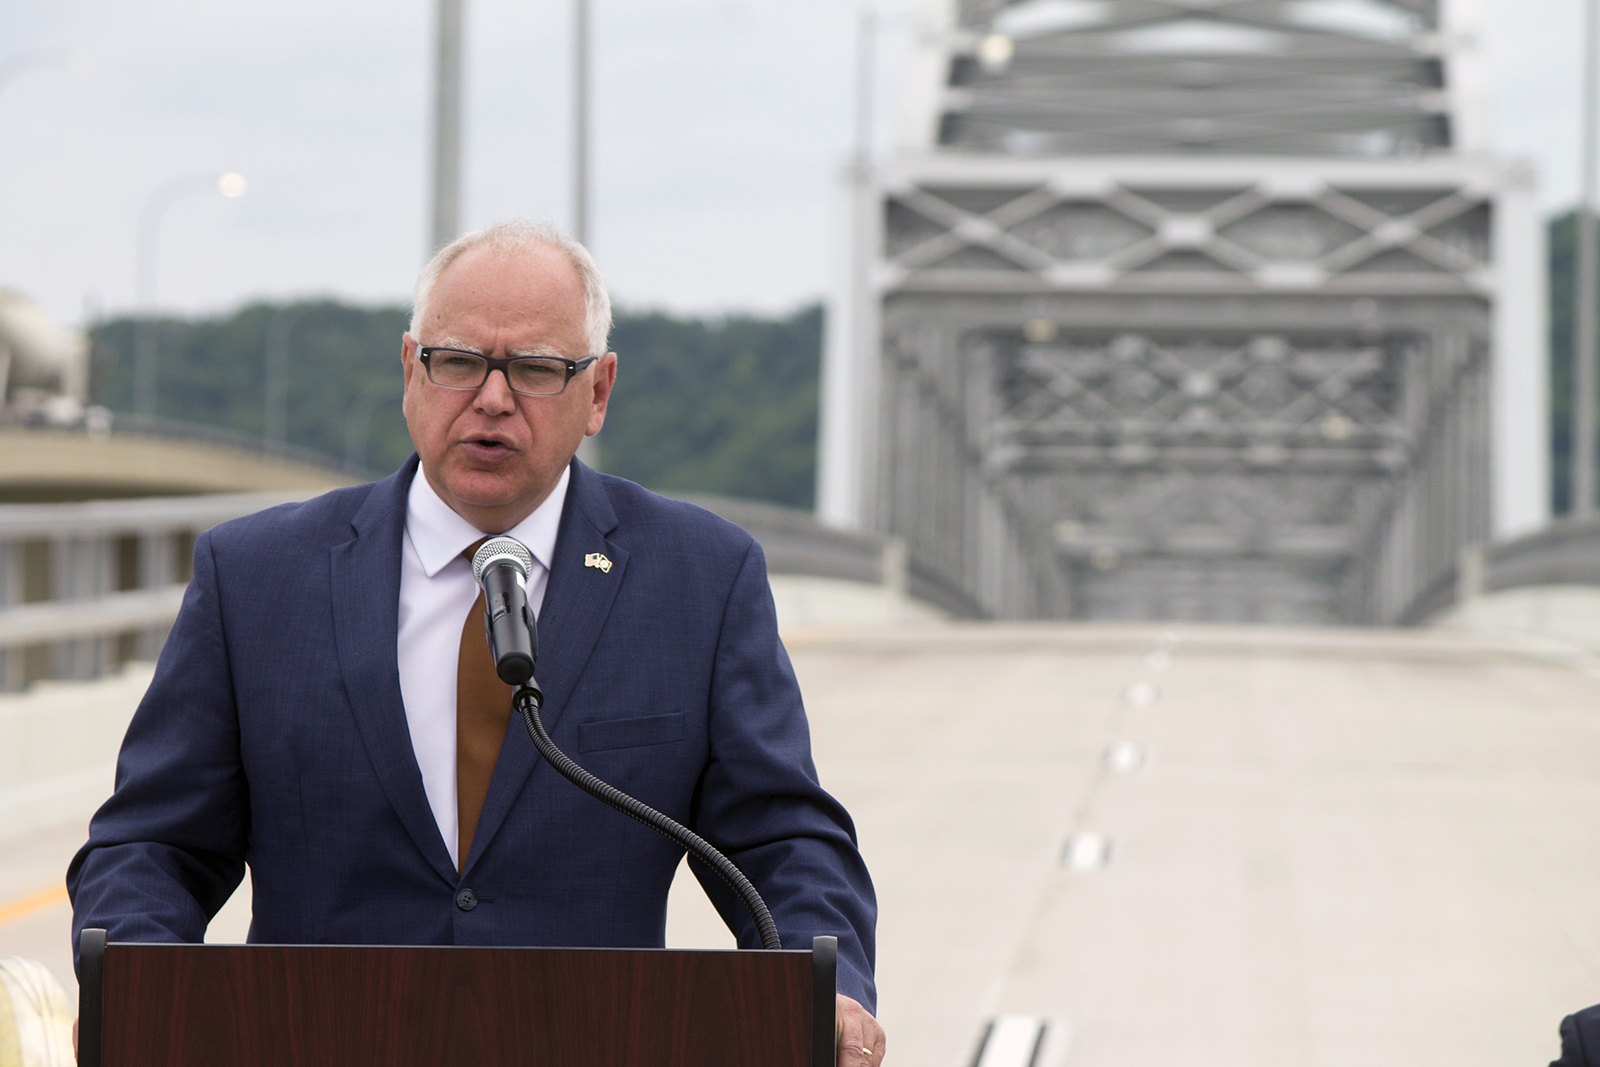 Governor Tim Walz speaks at a podium, with the repaired bridge in the background